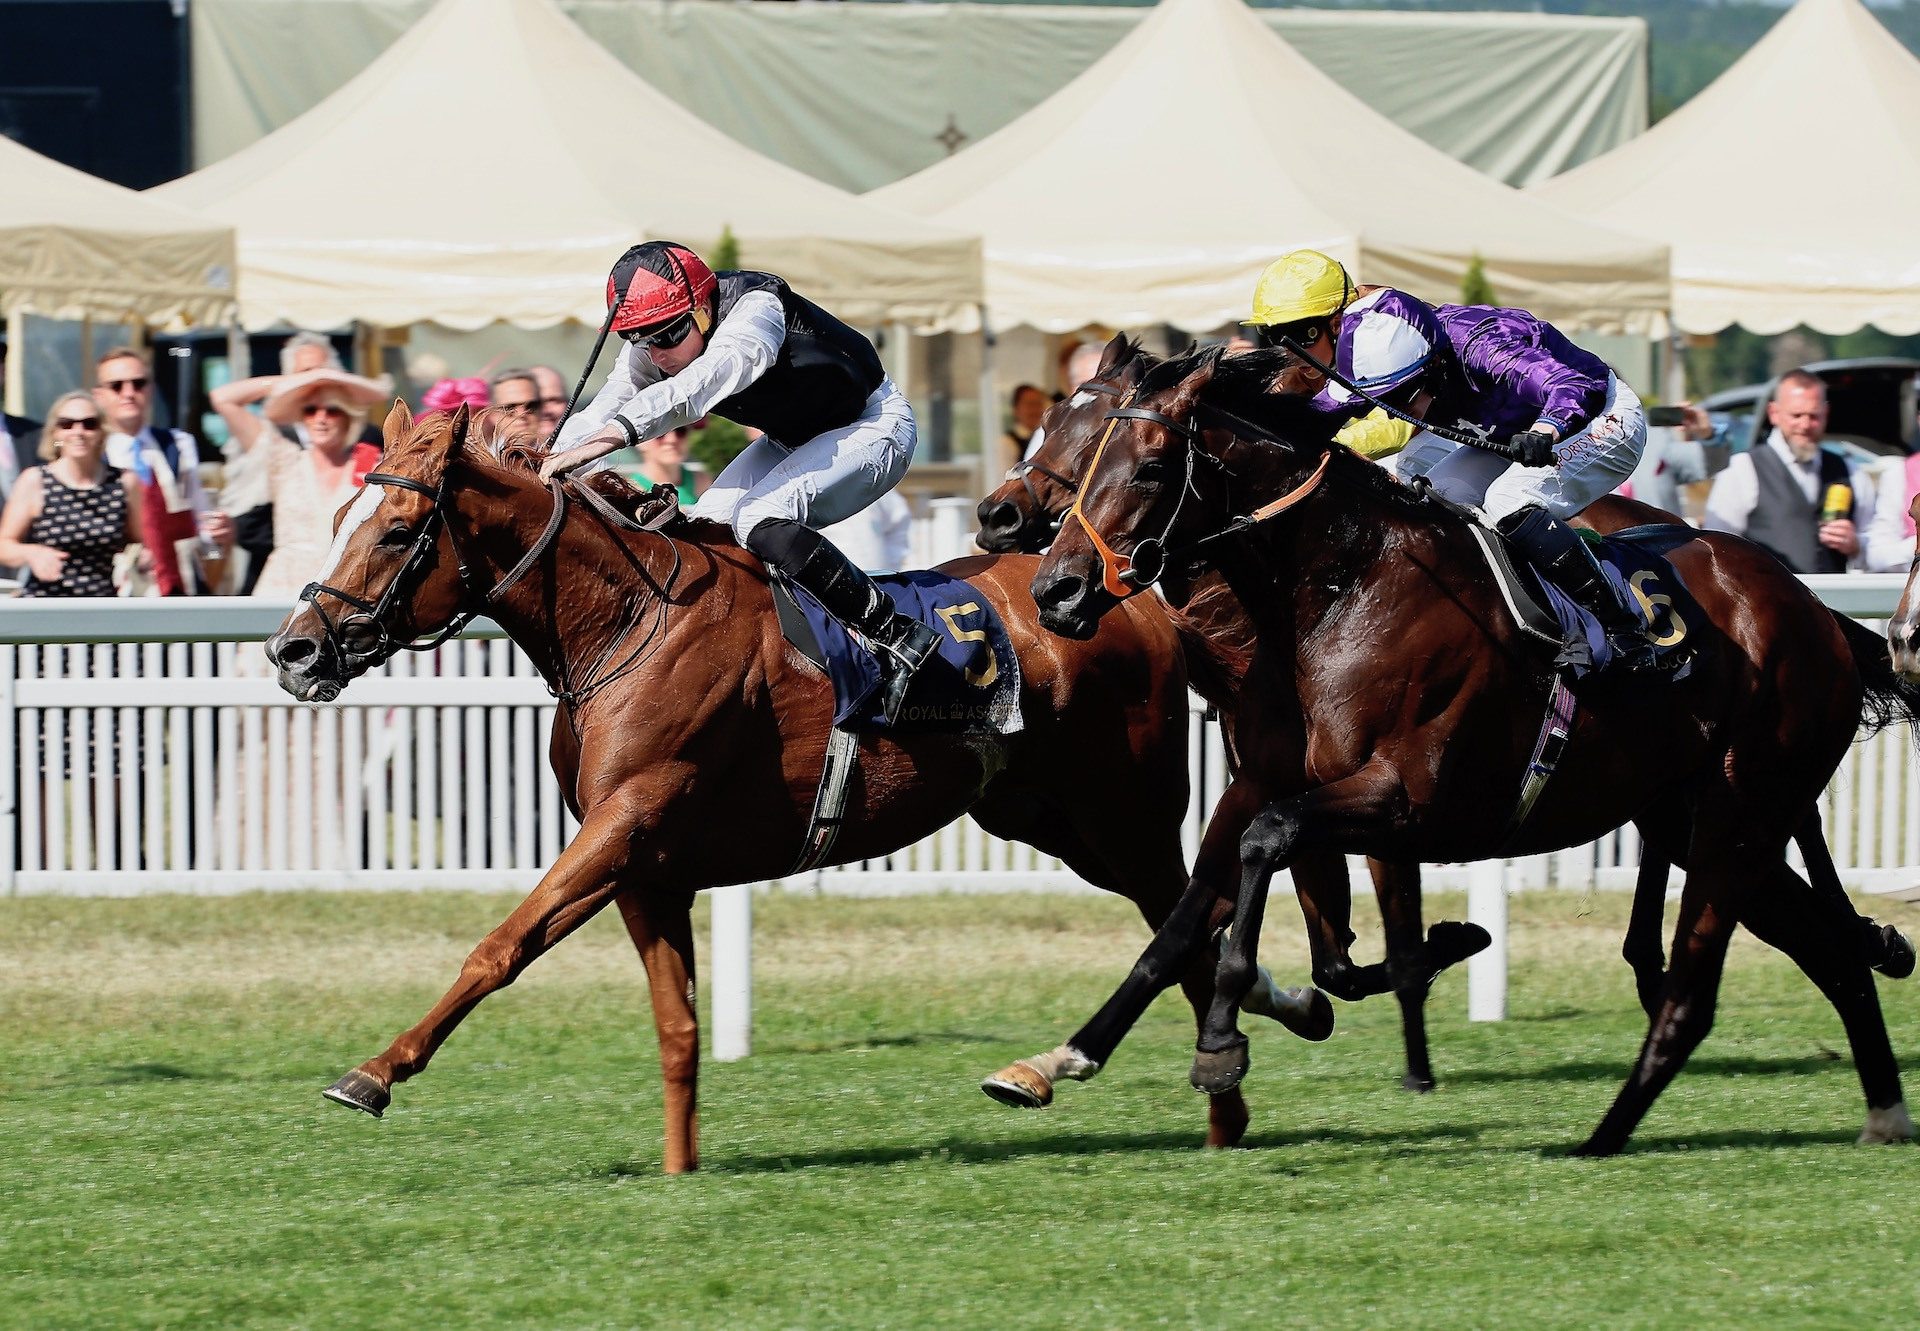 Kyprios (Galileo) Wins The Group 1 Ascot Gold Cup at Royal Ascot